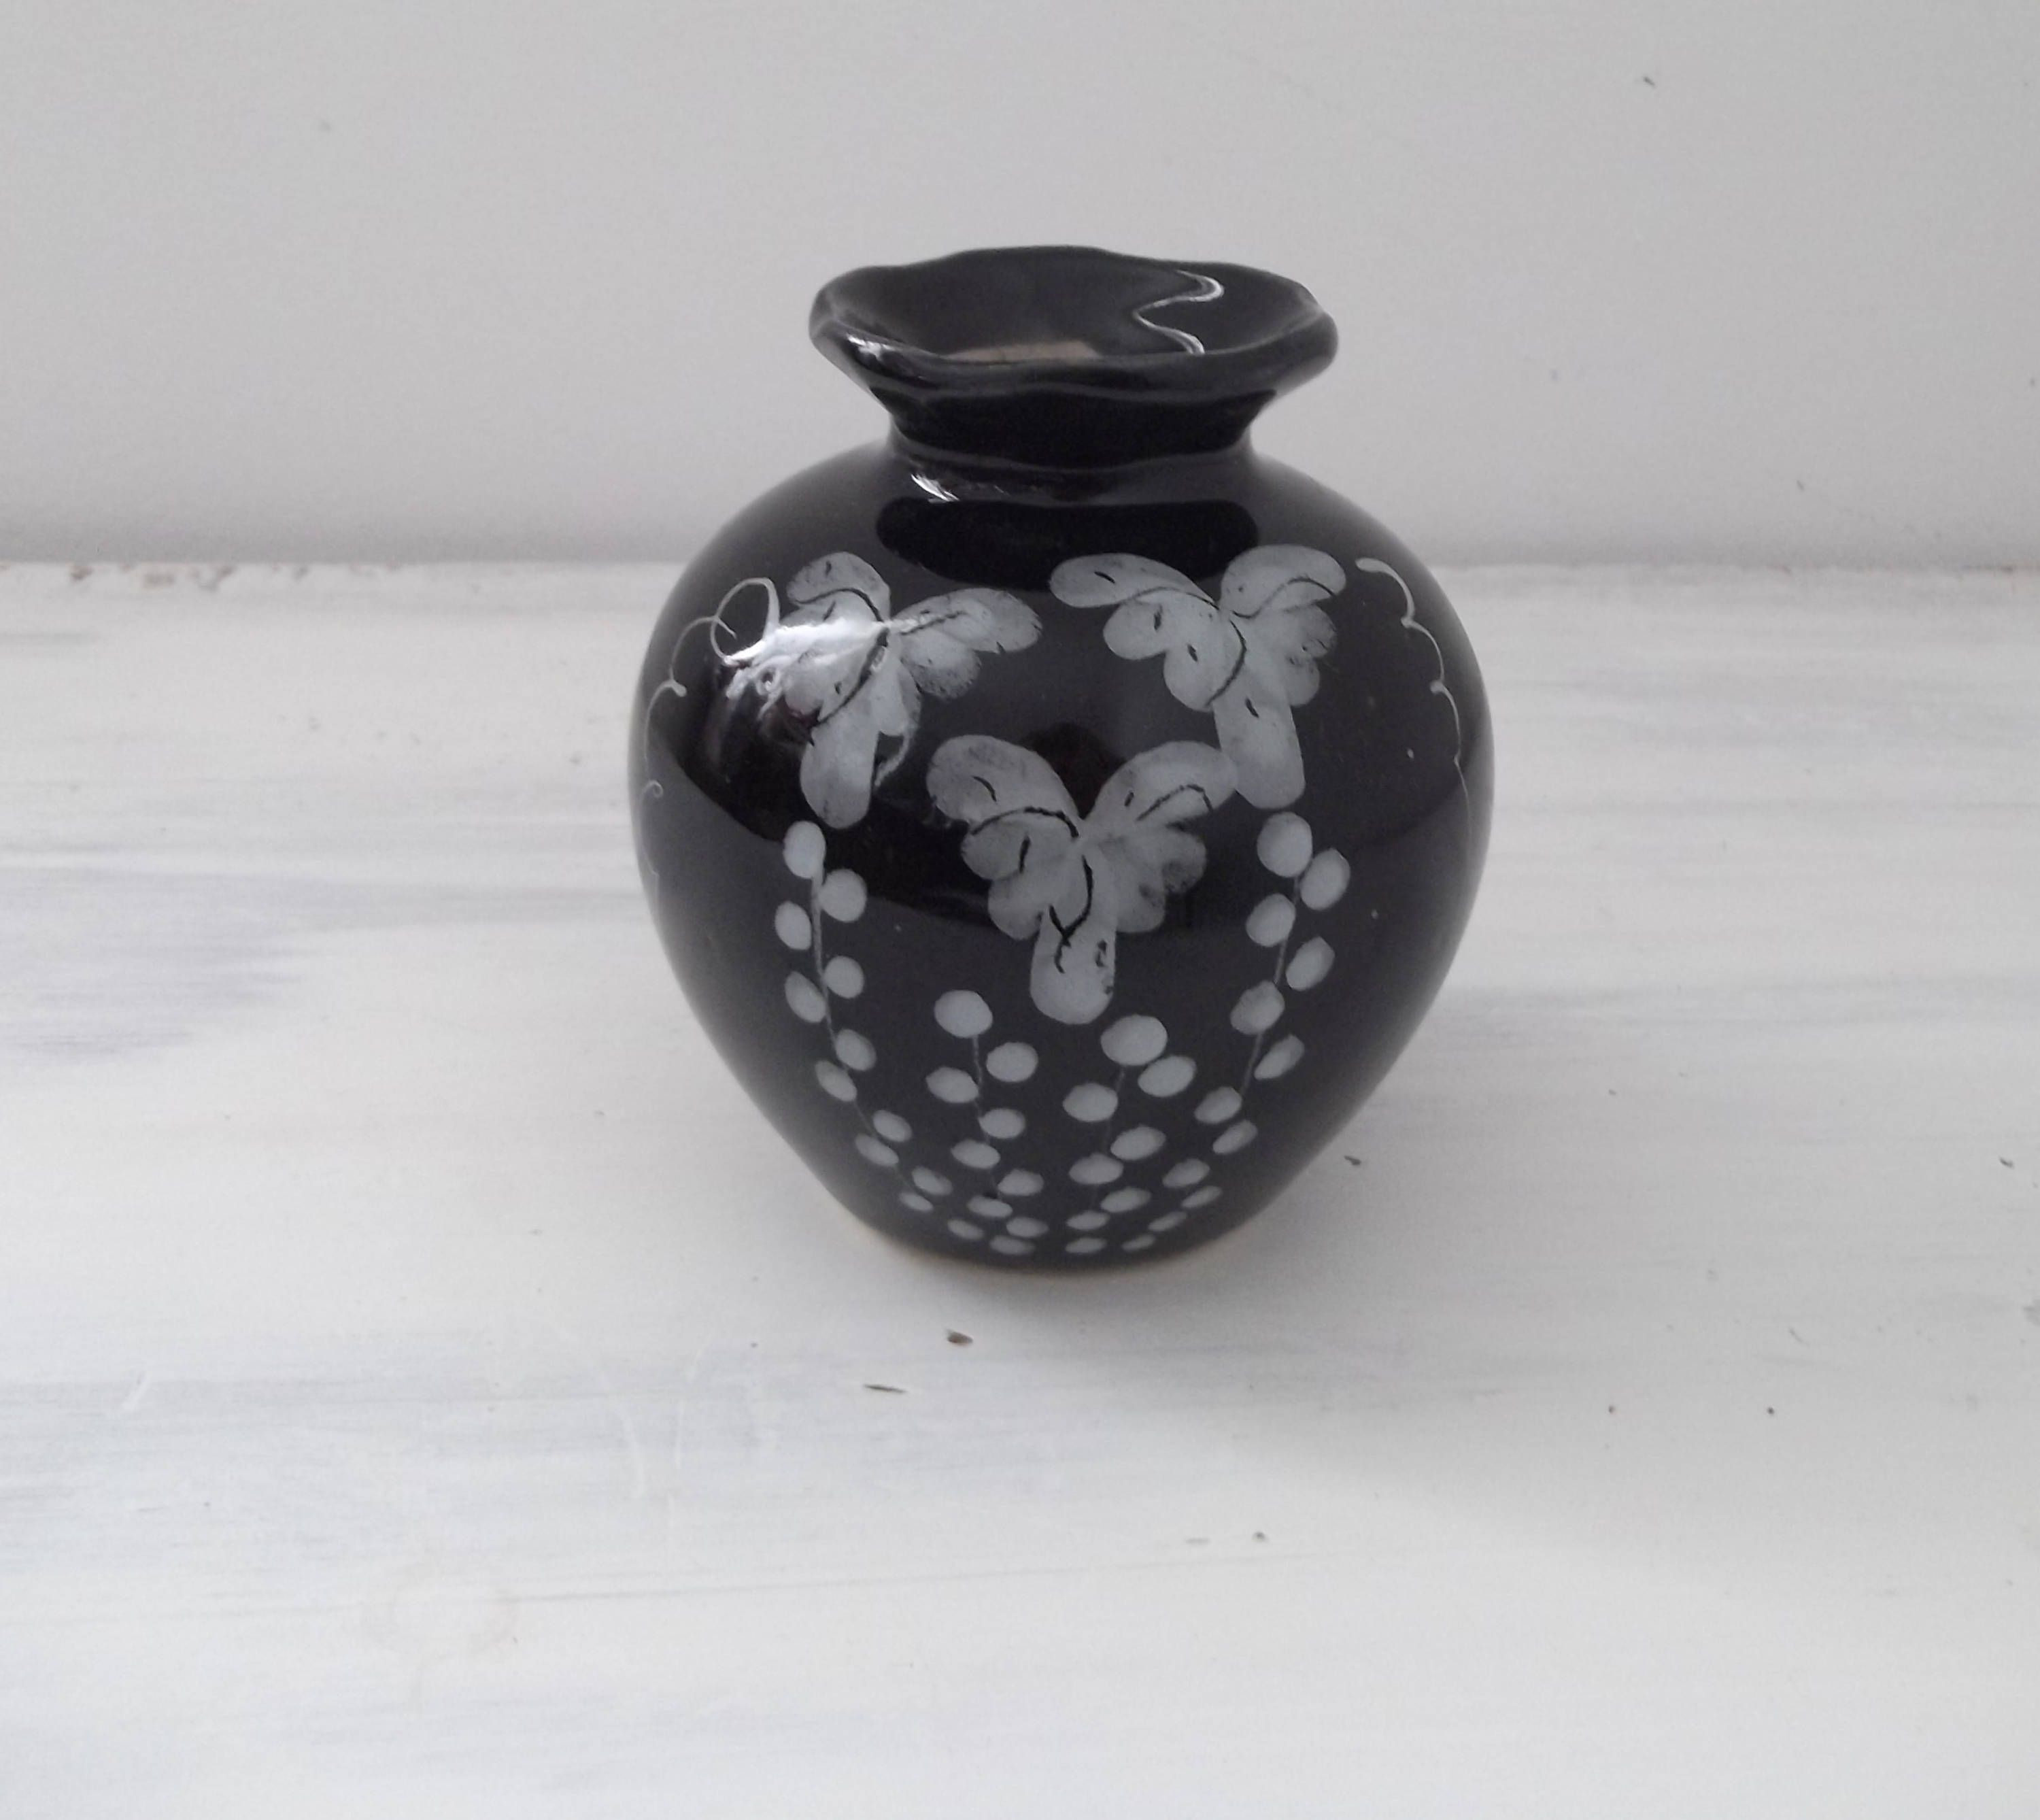 22 Lovable Black Glass Vase Vintage 2024 free download black glass vase vintage of black grey grapevine handpainted posey vase vintage 70s pottery in pretty vintage black grey grapevine handpainted pattern posey vase pottery vases chinoiserie